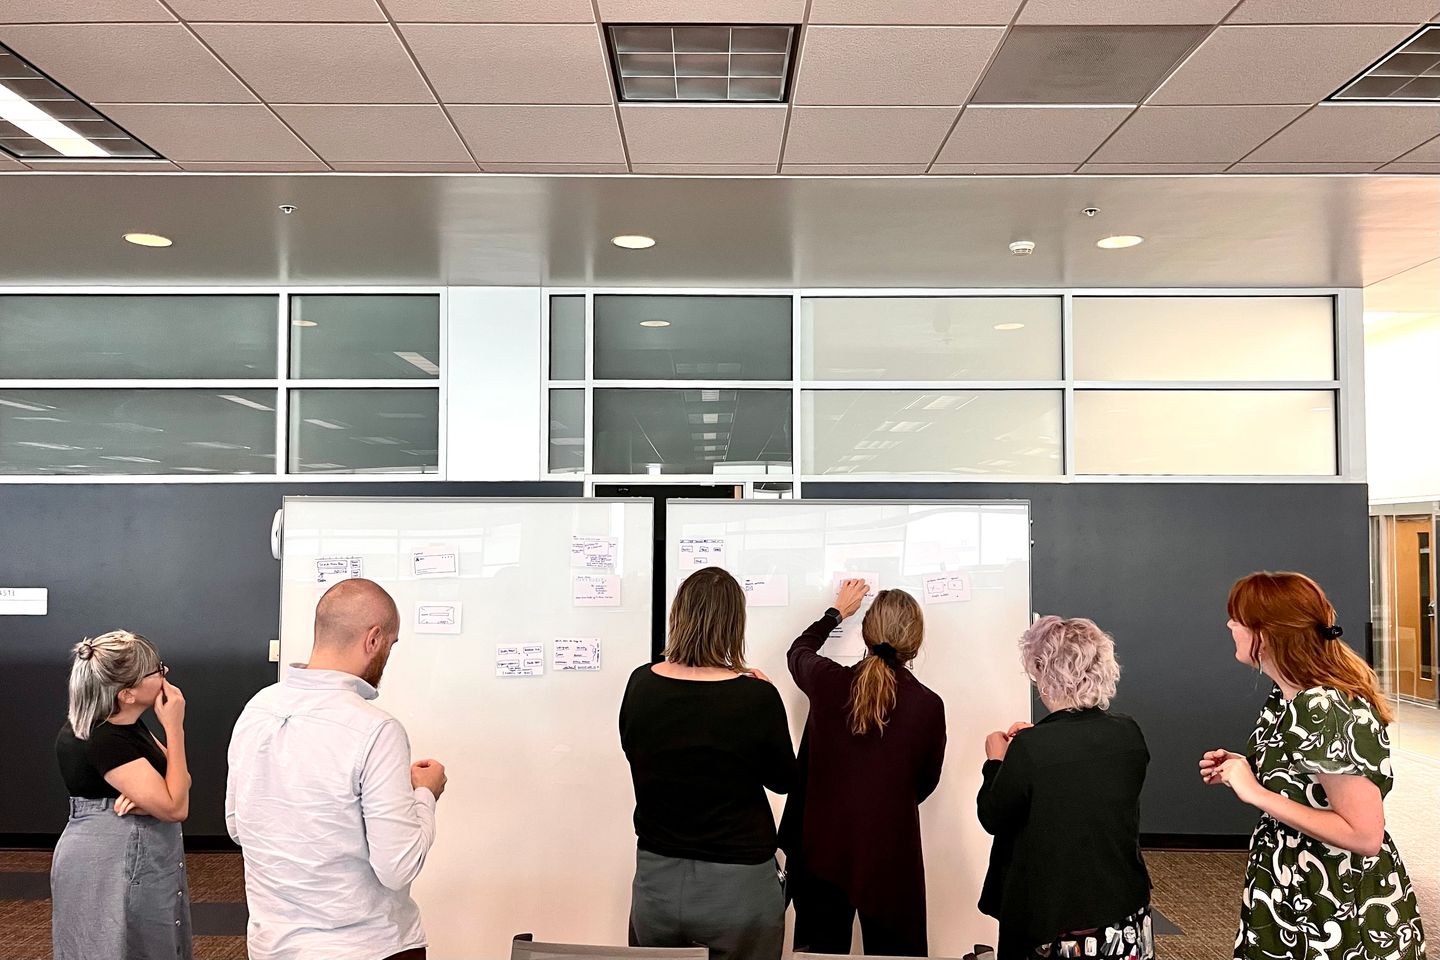 Several people viewing sketches on whiteboards